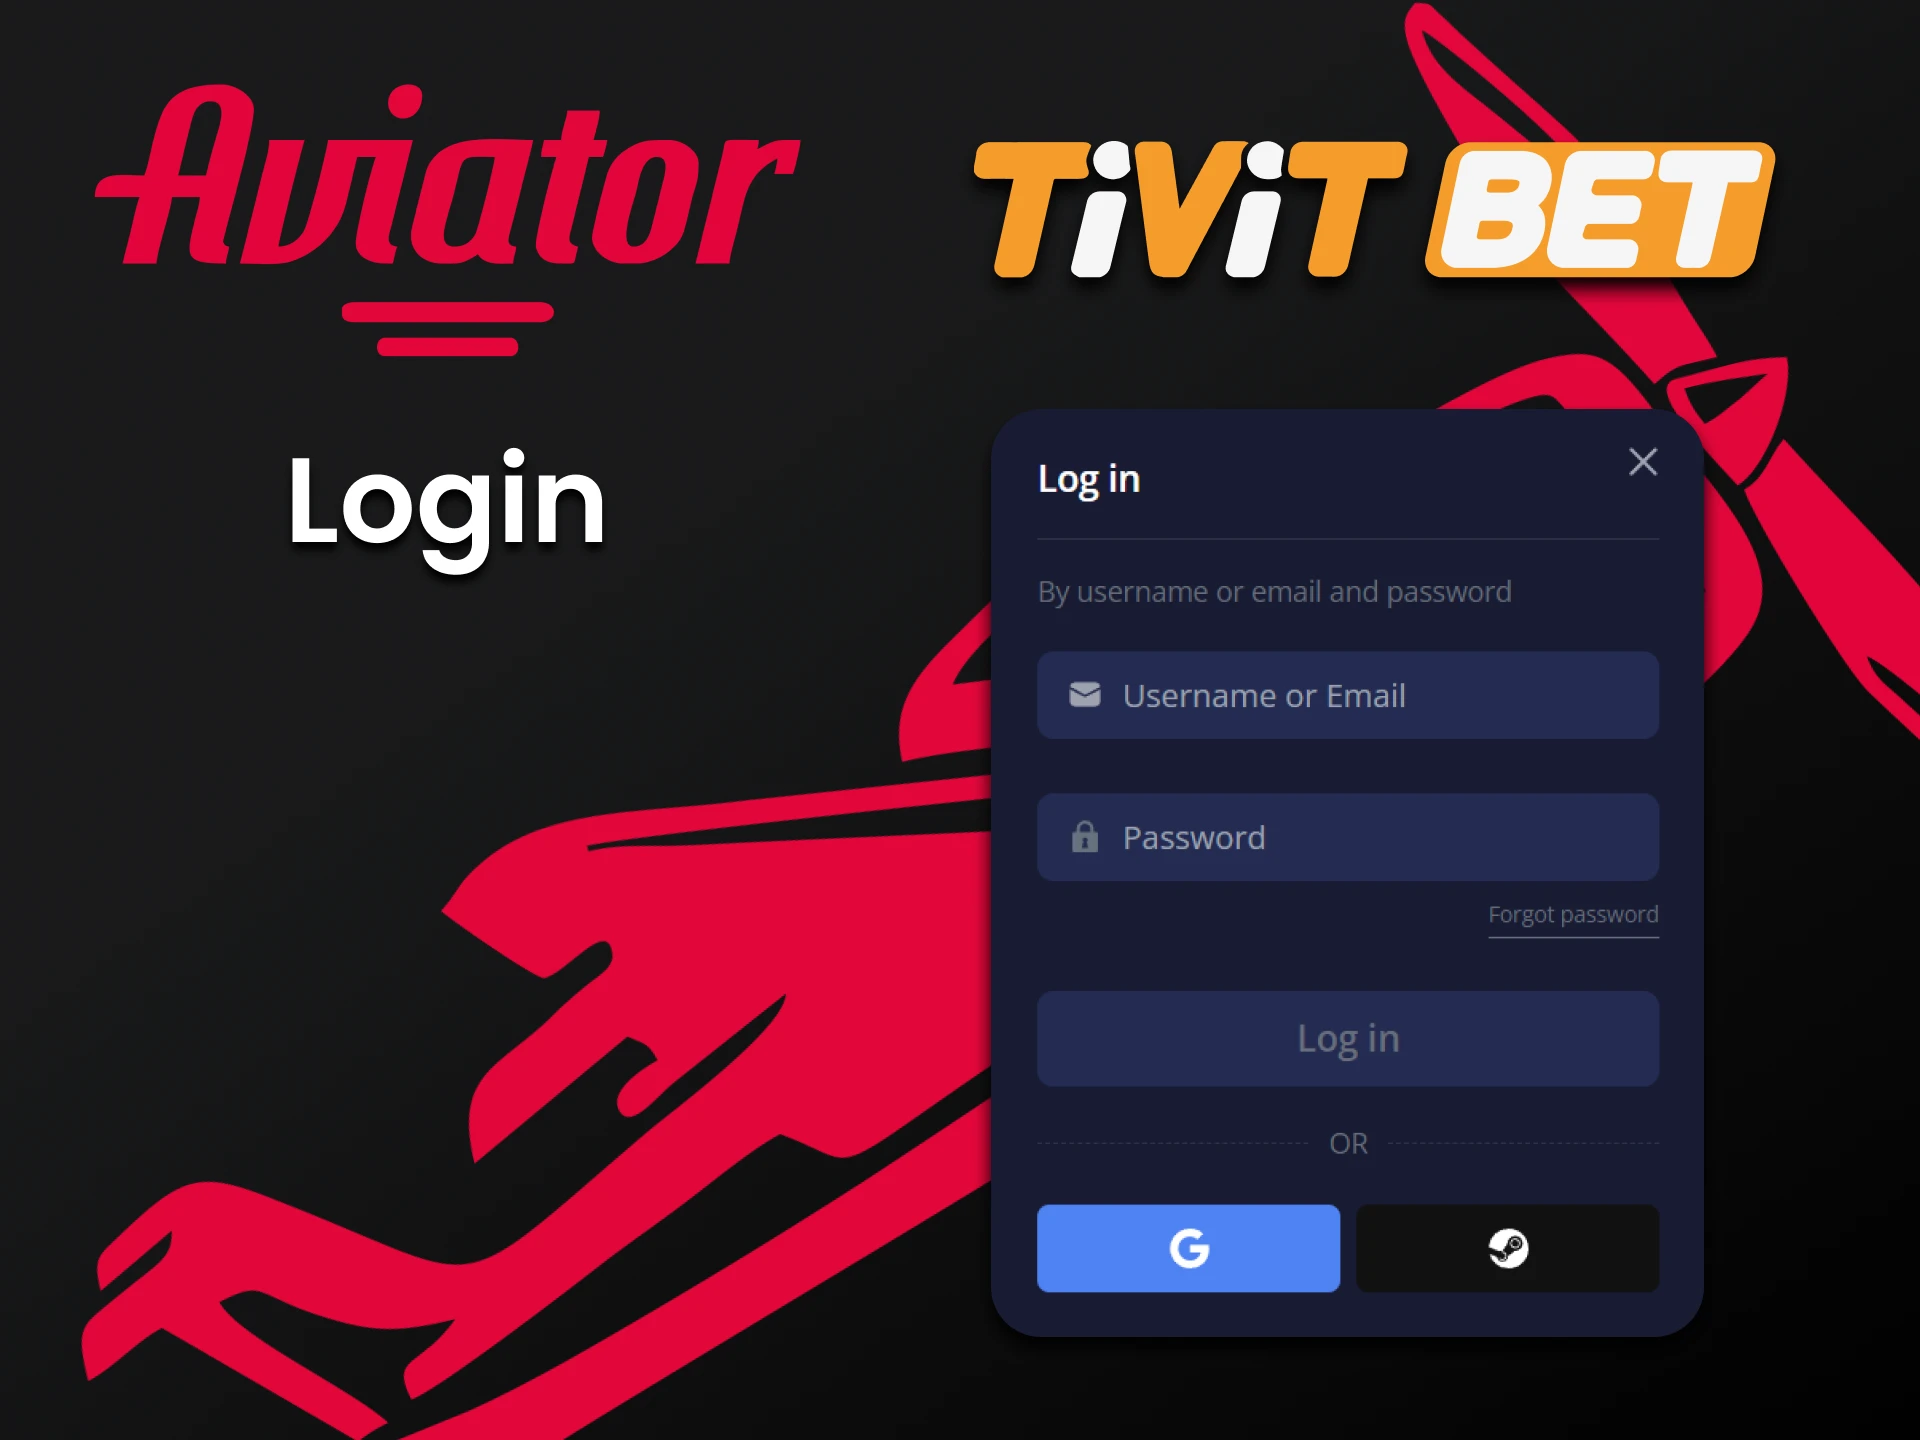 Log in to your Tivitbet account to play Aviator.